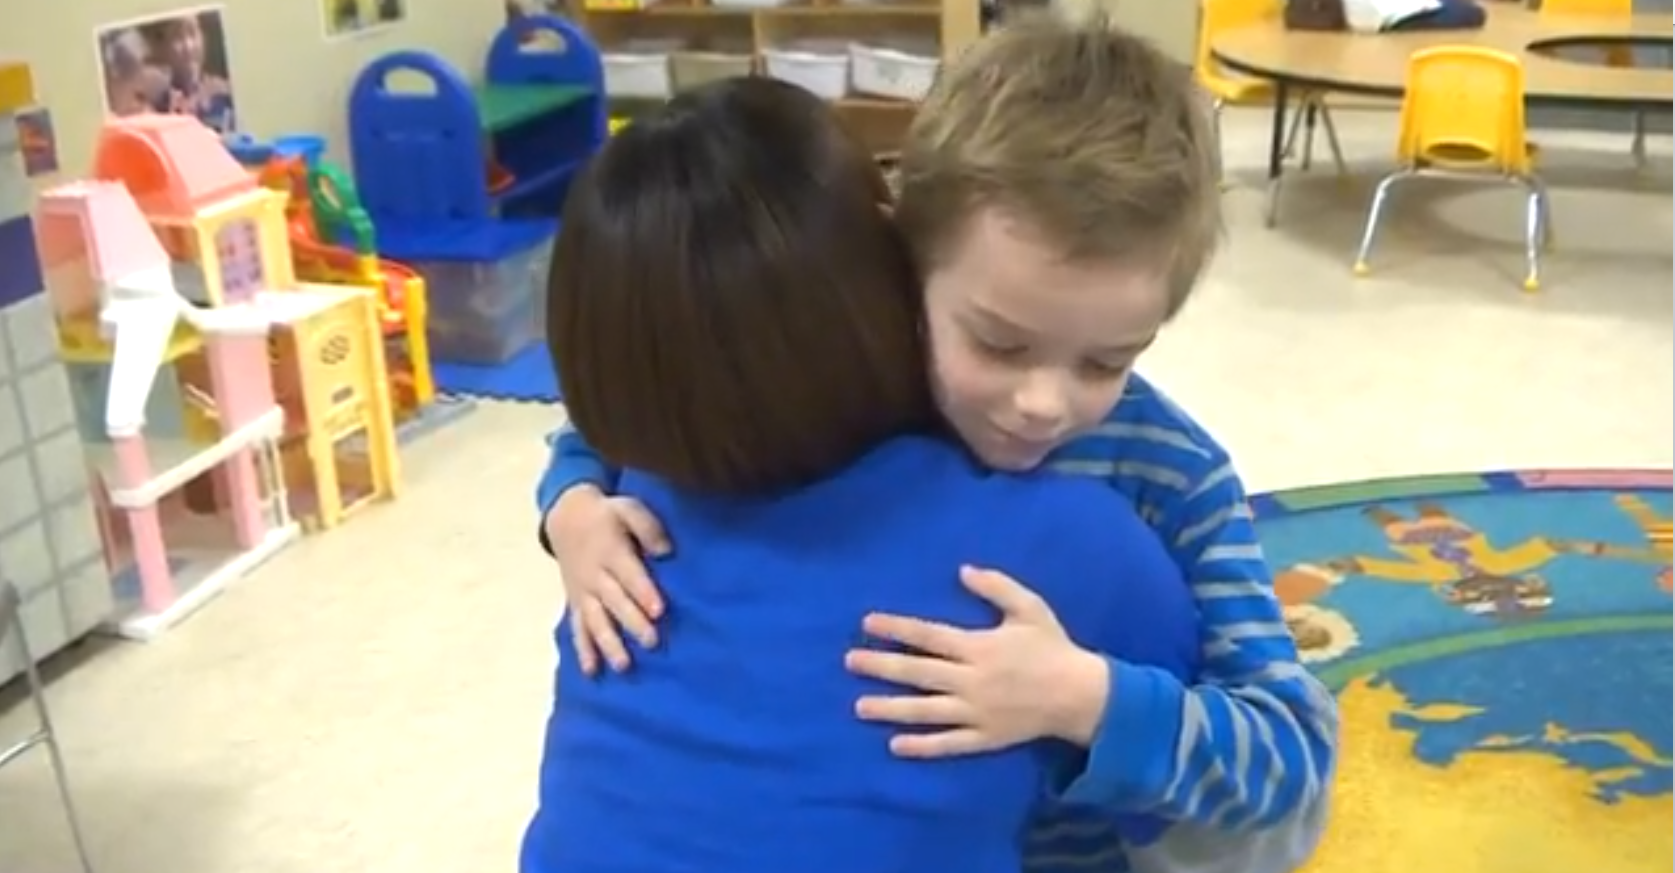 Camden hugs his teacher, who is suffering from lung cancer